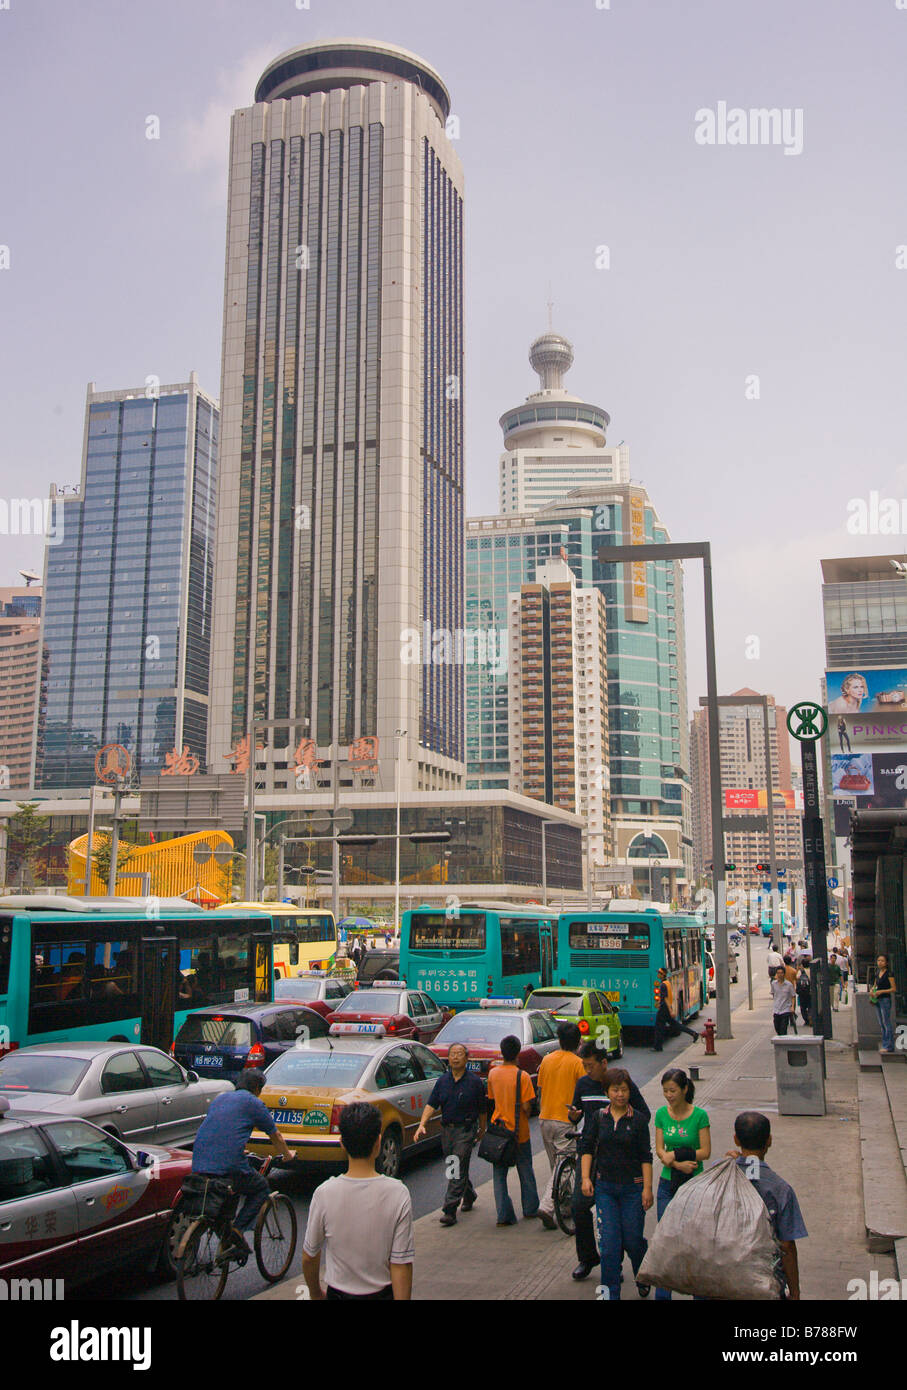 SHENZHEN, GUANGDONG PROVINCE, CHINA - Bustling street scene with people and traffic, in city of Shenzhen. Stock Photo